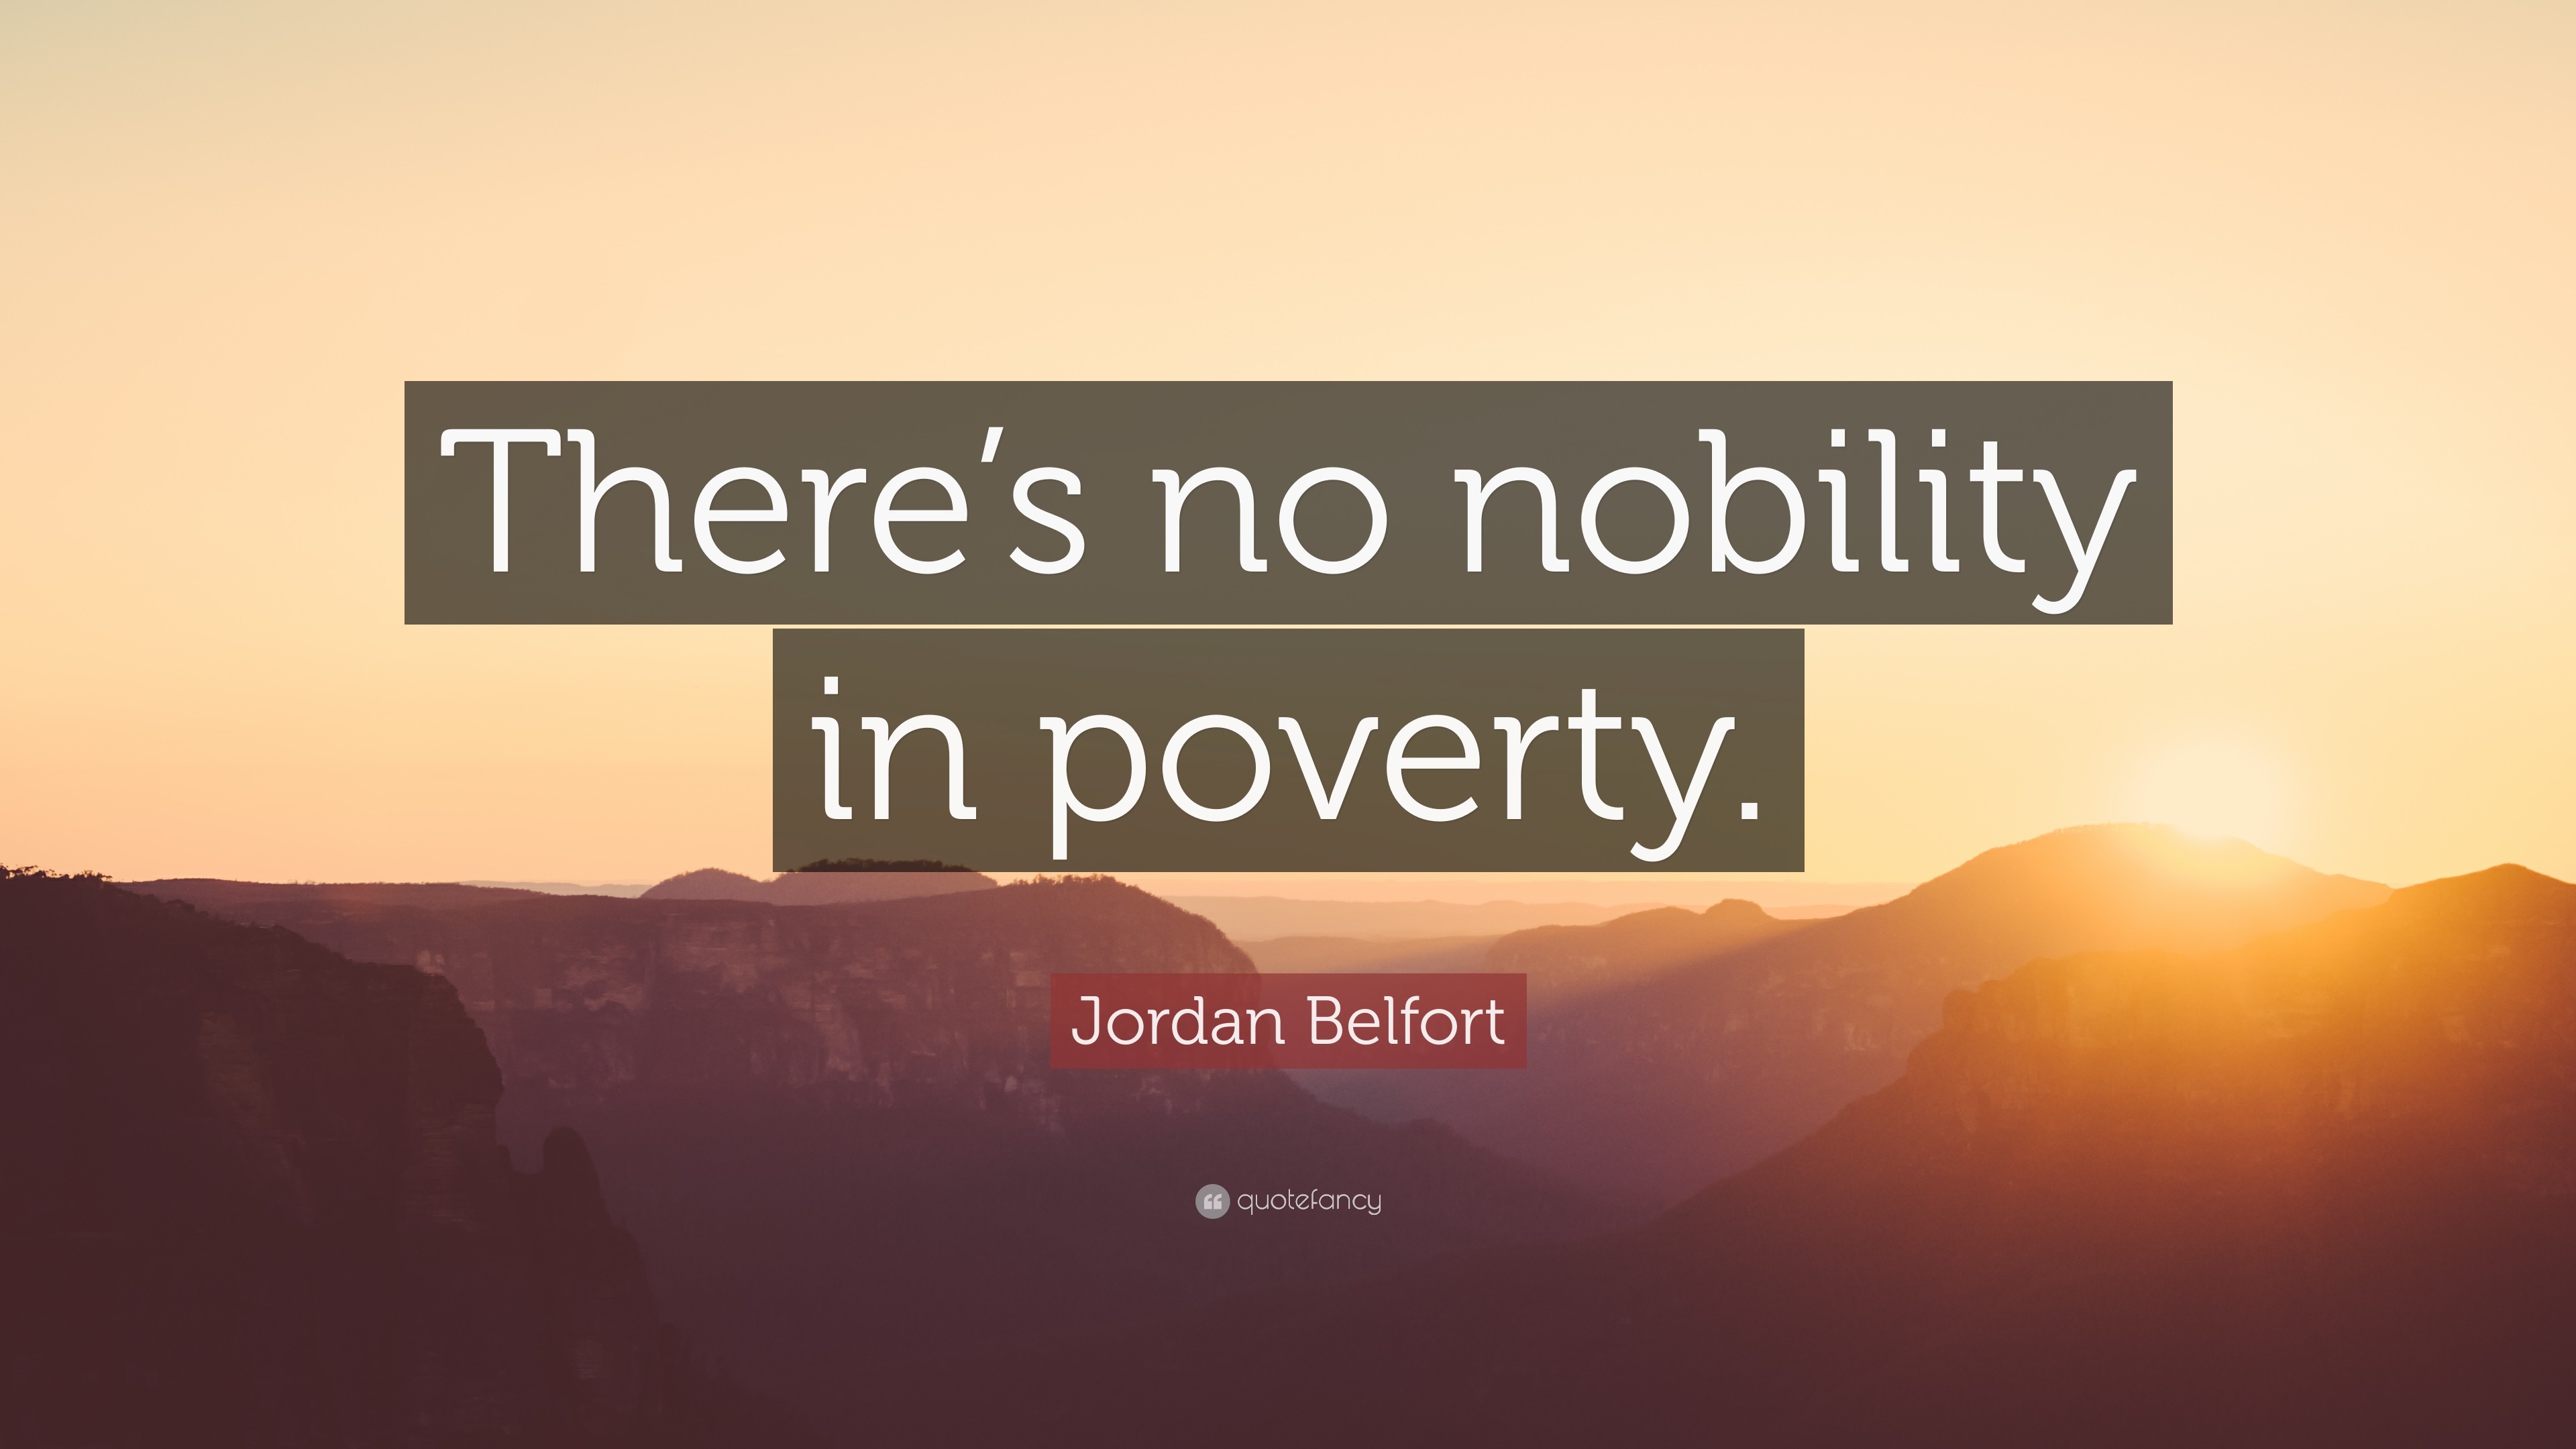 3840x2160 23 wallpapers. Jordan Belfort Quote: “There's no nobility in poverty.”